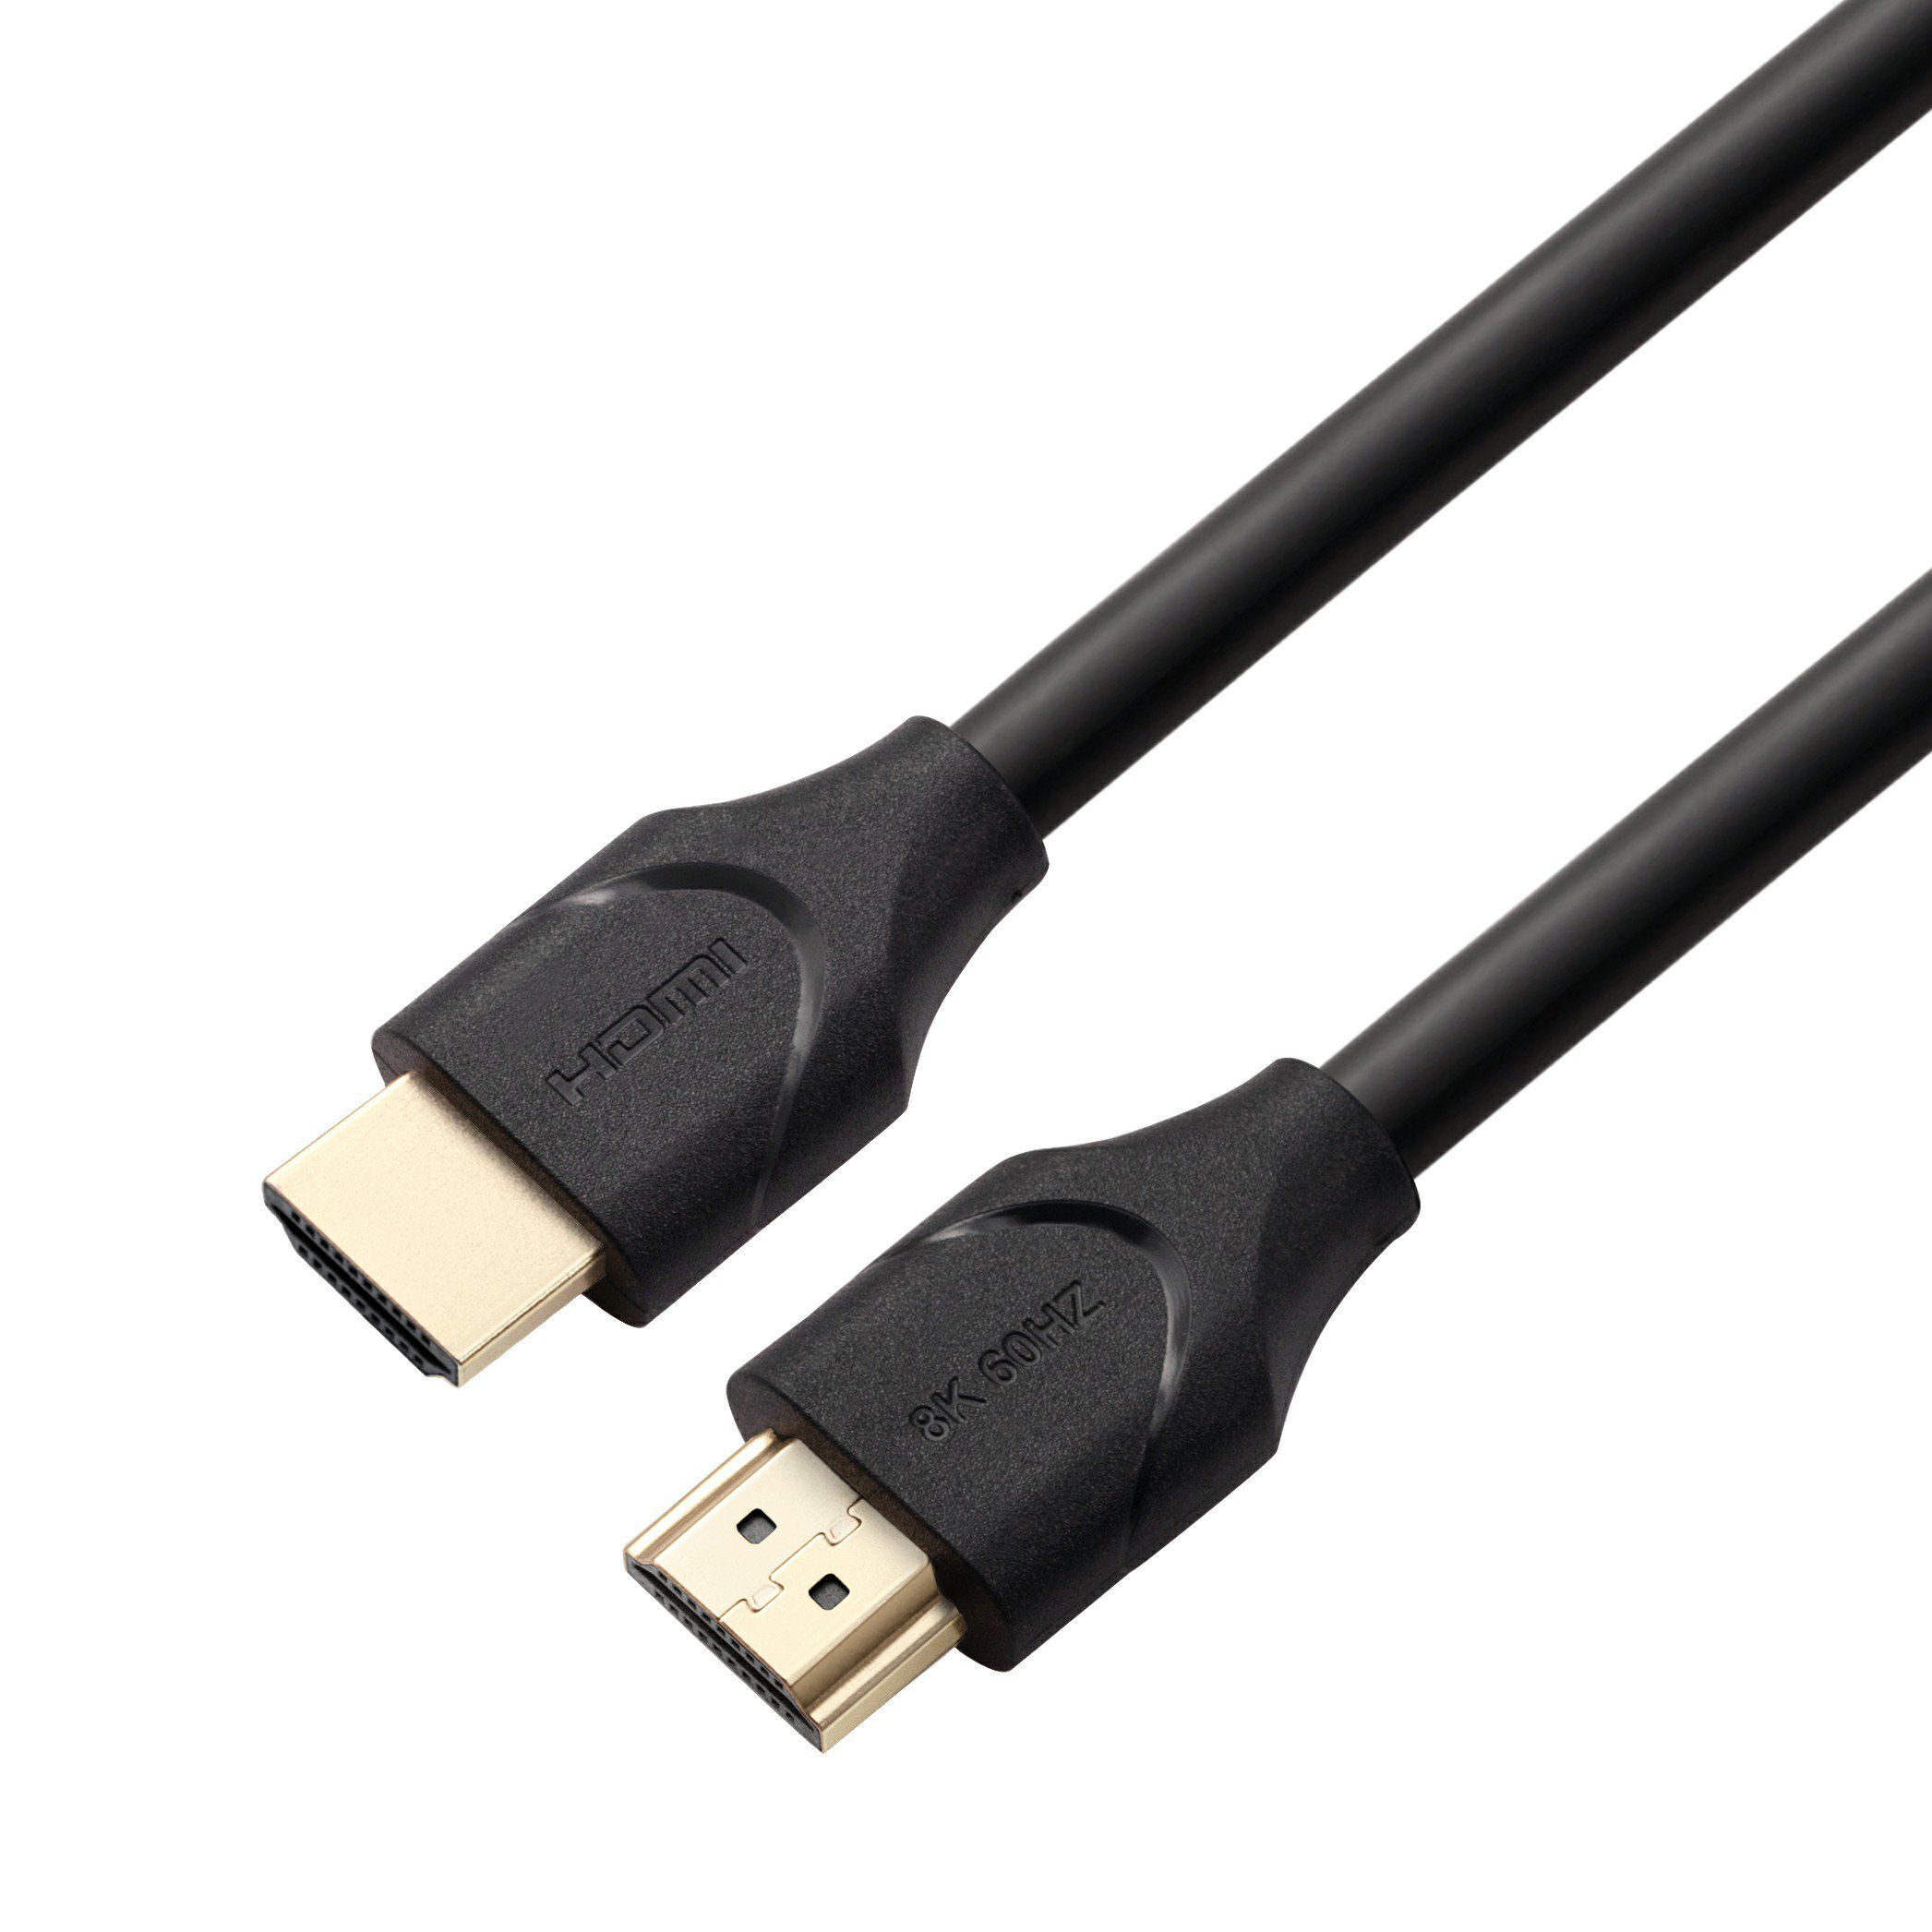 48Gbps data transmission HDMI 2.1 Cable